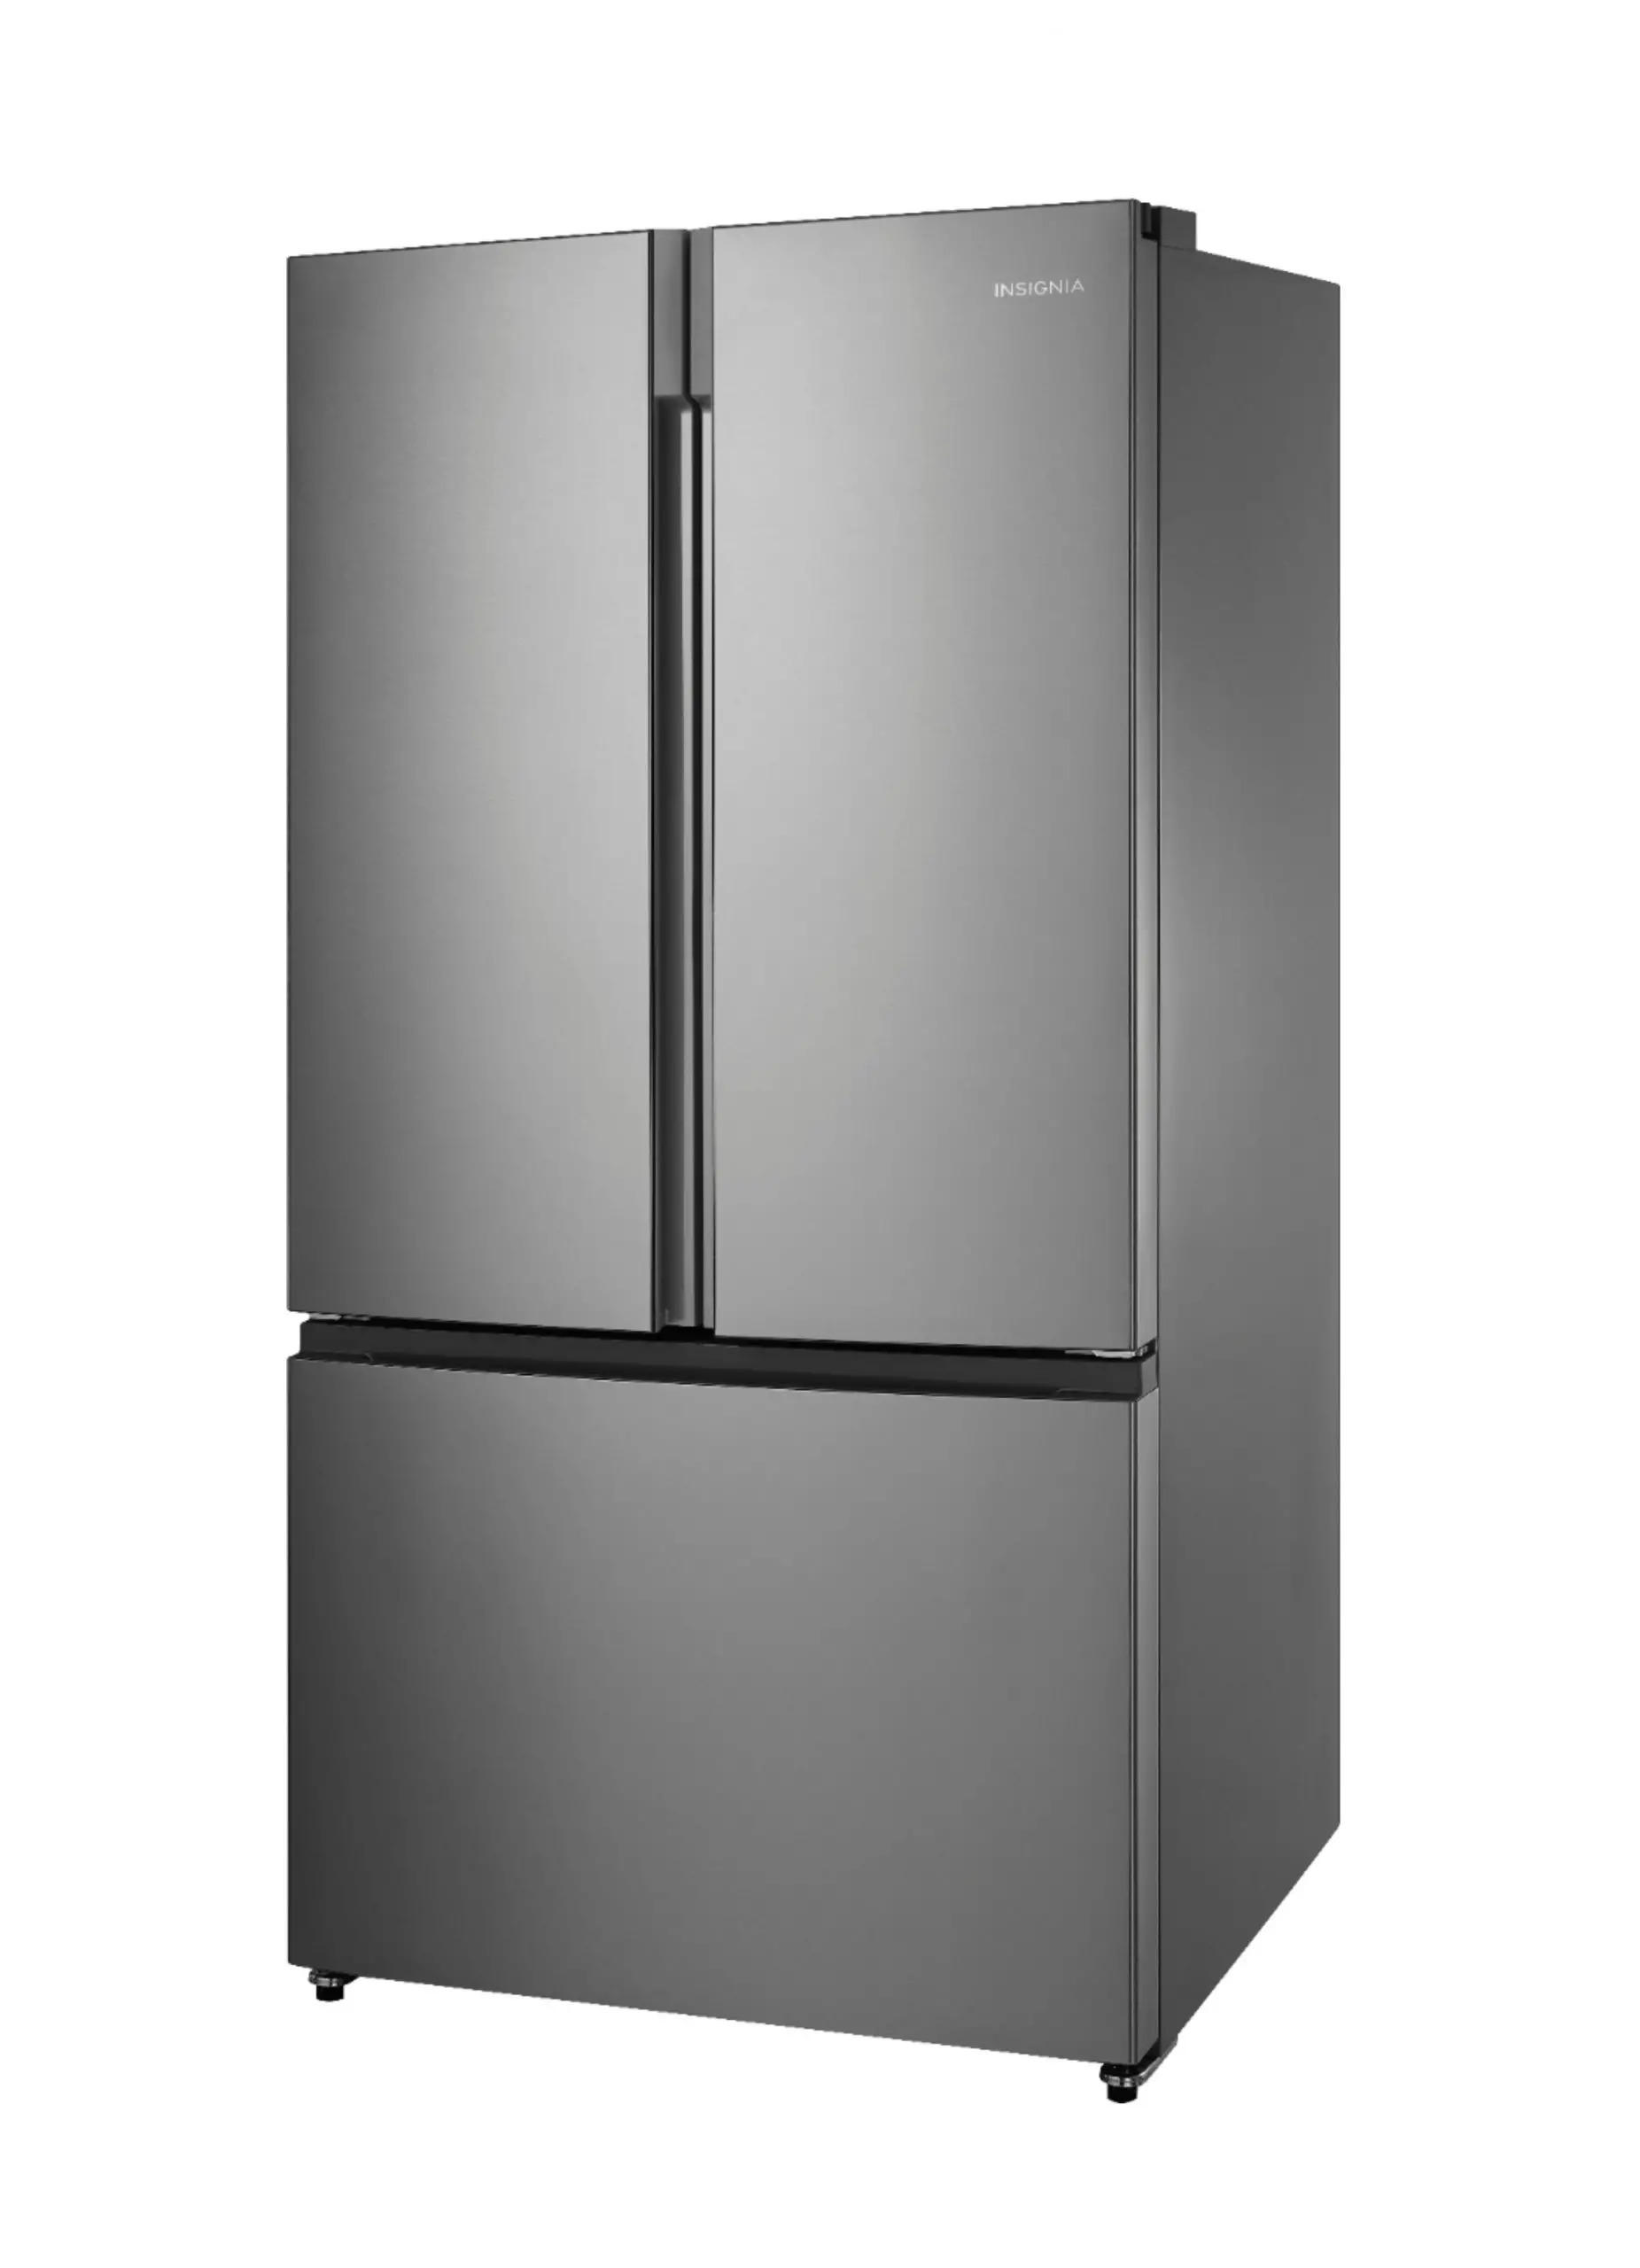 NS-RFD26SS9 26.6 Cu. Ft. French Door Refrigerator